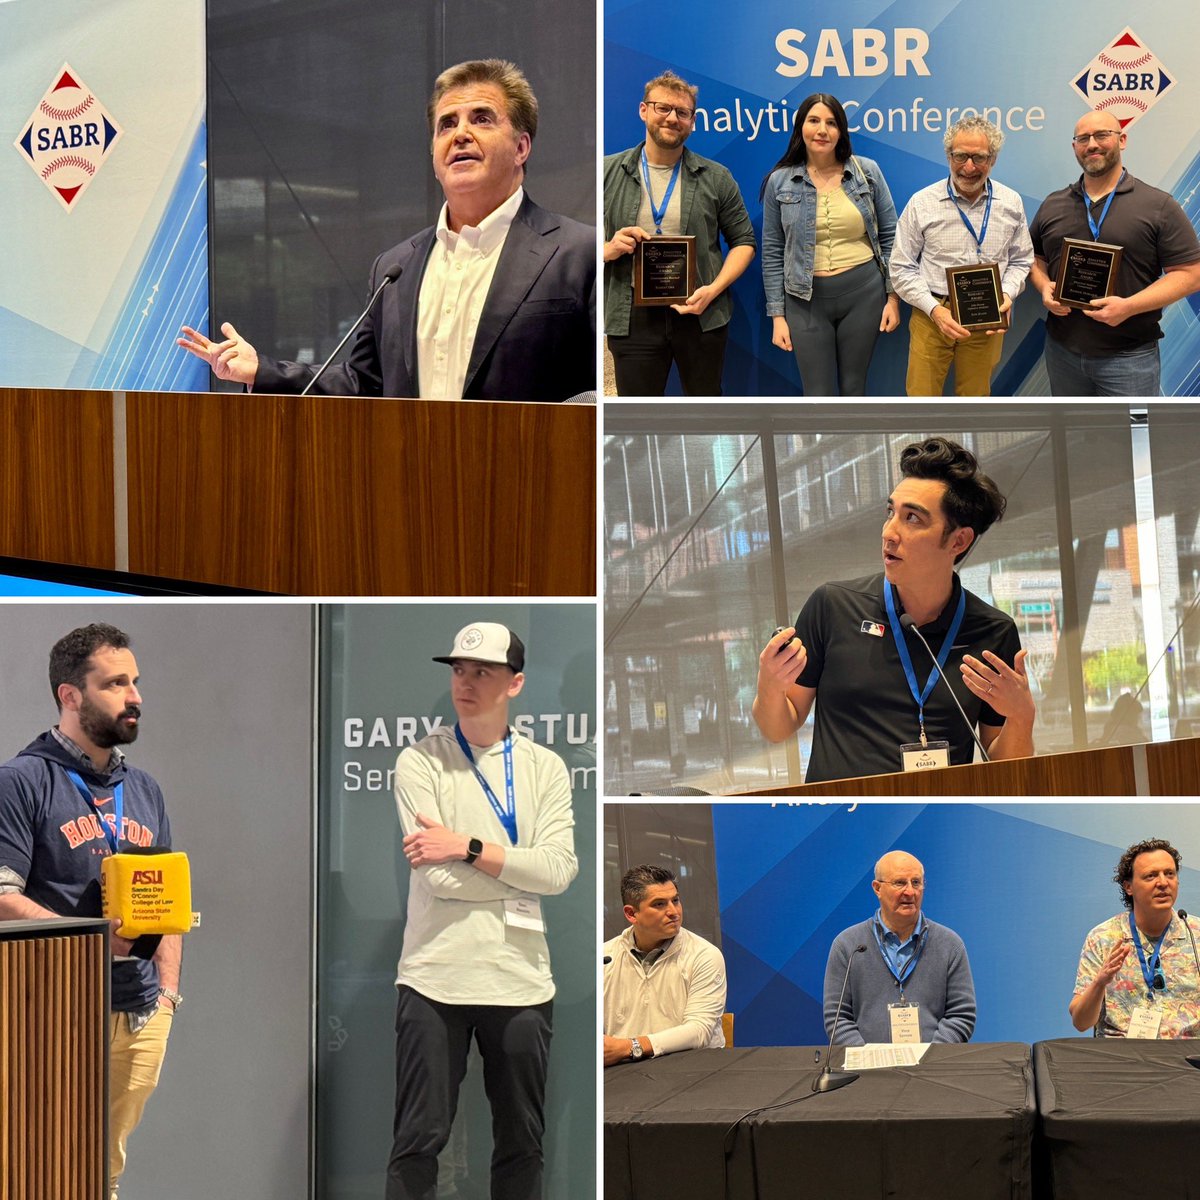 That’s a wrap here at @ASUCollegeOfLaw in Phoenix! Thanks to all of our panelists, presenters, attendees, and partners for a terrific #SABRanalytics Conference! Check out photos and highlights from all 3 days soon at sabr.org/analytics